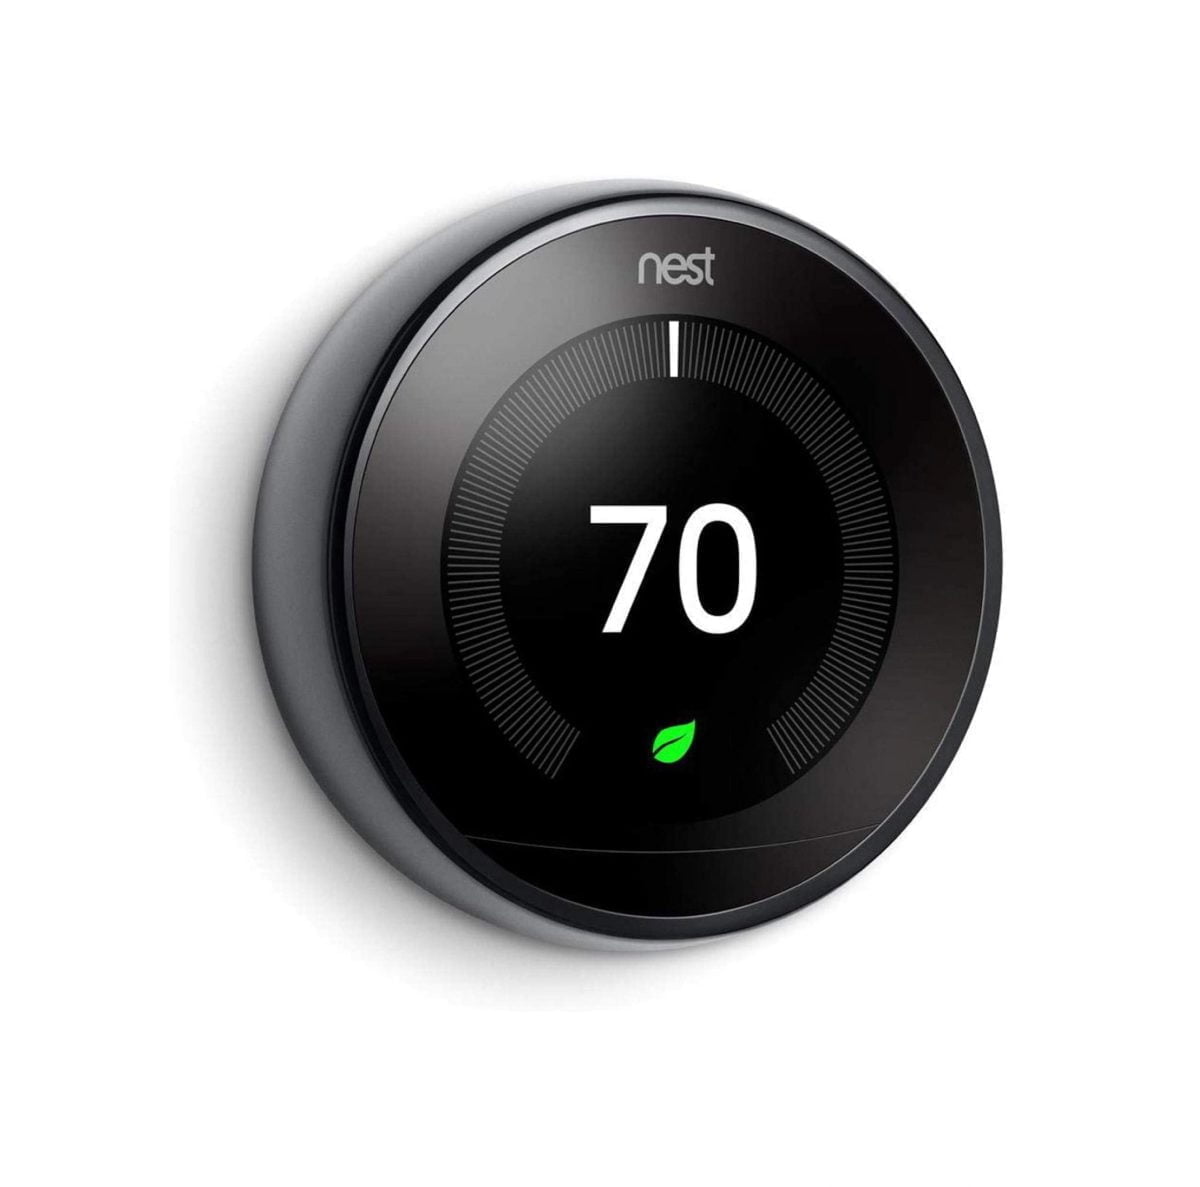 Ewe 01 Scaled Google &Lt;H1&Gt;Google Nest Learning Smart Wifi Thermostat 3Rd Gen - T3018Us Mirror Black&Lt;/H1&Gt; &Lt;Ul Class=&Quot;A-Unordered-List A-Vertical A-Spacing-Mini&Quot;&Gt; &Lt;Li&Gt;&Lt;Span Class=&Quot;A-List-Item&Quot;&Gt;Auto-Schedule: No More Confusing Programming. It Learns The Temperatures You Like And Programs Itself.&Lt;/Span&Gt;&Lt;/Li&Gt; &Lt;Li&Gt;&Lt;Span Class=&Quot;A-List-Item&Quot;&Gt;Wi-Fi Thermostat: Connect The Nest Thermostat To Wi-Fi To Change The Temperature From Your Phone, Tablet Or Laptop.&Lt;/Span&Gt;&Lt;/Li&Gt; &Lt;Li&Gt;&Lt;Span Class=&Quot;A-List-Item&Quot;&Gt;Energy Saving: You’ll See The Nest Leaf When You Choose A Temperature That Saves Energy. It Guides You In The Right Direction.&Lt;/Span&Gt;&Lt;/Li&Gt; &Lt;Li&Gt;&Lt;Span Class=&Quot;A-List-Item&Quot;&Gt;Smart Thermostat: Early-On Nest Learns How Your Home Warms Up And Keeps An Eye On The Weather To Get You The Temperature You Want When You Want It.&Lt;/Span&Gt;&Lt;/Li&Gt; &Lt;Li&Gt;&Lt;Span Class=&Quot;A-List-Item&Quot;&Gt;Home/Away Assist: The Nest Thermostat Automatically Turns Itself Down When You’re Away To Avoid Heating Or Cooling An Empty Home.&Lt;/Span&Gt;&Lt;/Li&Gt; &Lt;Li&Gt;&Lt;Span Class=&Quot;A-List-Item&Quot;&Gt;Works With Amazon Alexa For Voice Control (Alexa Device Sold Separately)&Lt;/Span&Gt;&Lt;/Li&Gt; &Lt;Li&Gt;&Lt;Span Class=&Quot;A-List-Item&Quot;&Gt;Auto-Schedule: Nest Learns The Temperatures You Like And Programs Itself In About A Week.&Lt;/Span&Gt; &Lt;H5&Gt;Note : Direct Replacement Warranty One Year&Lt;/H5&Gt; &Lt;Div Class=&Quot;Html-Fragment&Quot;&Gt; &Lt;Div&Gt; &Lt;B&Gt;We Also Provide International Wholesale And Retail Shipping To All Gcc Countries: Saudi Arabia, Qatar, Oman, Kuwait, Bahrain.&Lt;/B&Gt; &Lt;/Div&Gt; &Lt;/Div&Gt;&Lt;/Li&Gt; &Lt;/Ul&Gt; &Lt;Div Class=&Quot;A-Row A-Expander-Container A-Expander-Inline-Container&Quot; Aria-Live=&Quot;Polite&Quot;&Gt; &Lt;Div Class=&Quot;A-Expander-Content A-Expander-Extend-Content A-Expander-Content-Expanded&Quot; Aria-Expanded=&Quot;True&Quot;&Gt;&Lt;/Div&Gt; &Lt;/Div&Gt; Thermostat Google Nest Learning Smart Wifi Thermostat 3Rd Gen - T3018Us Mirror Black